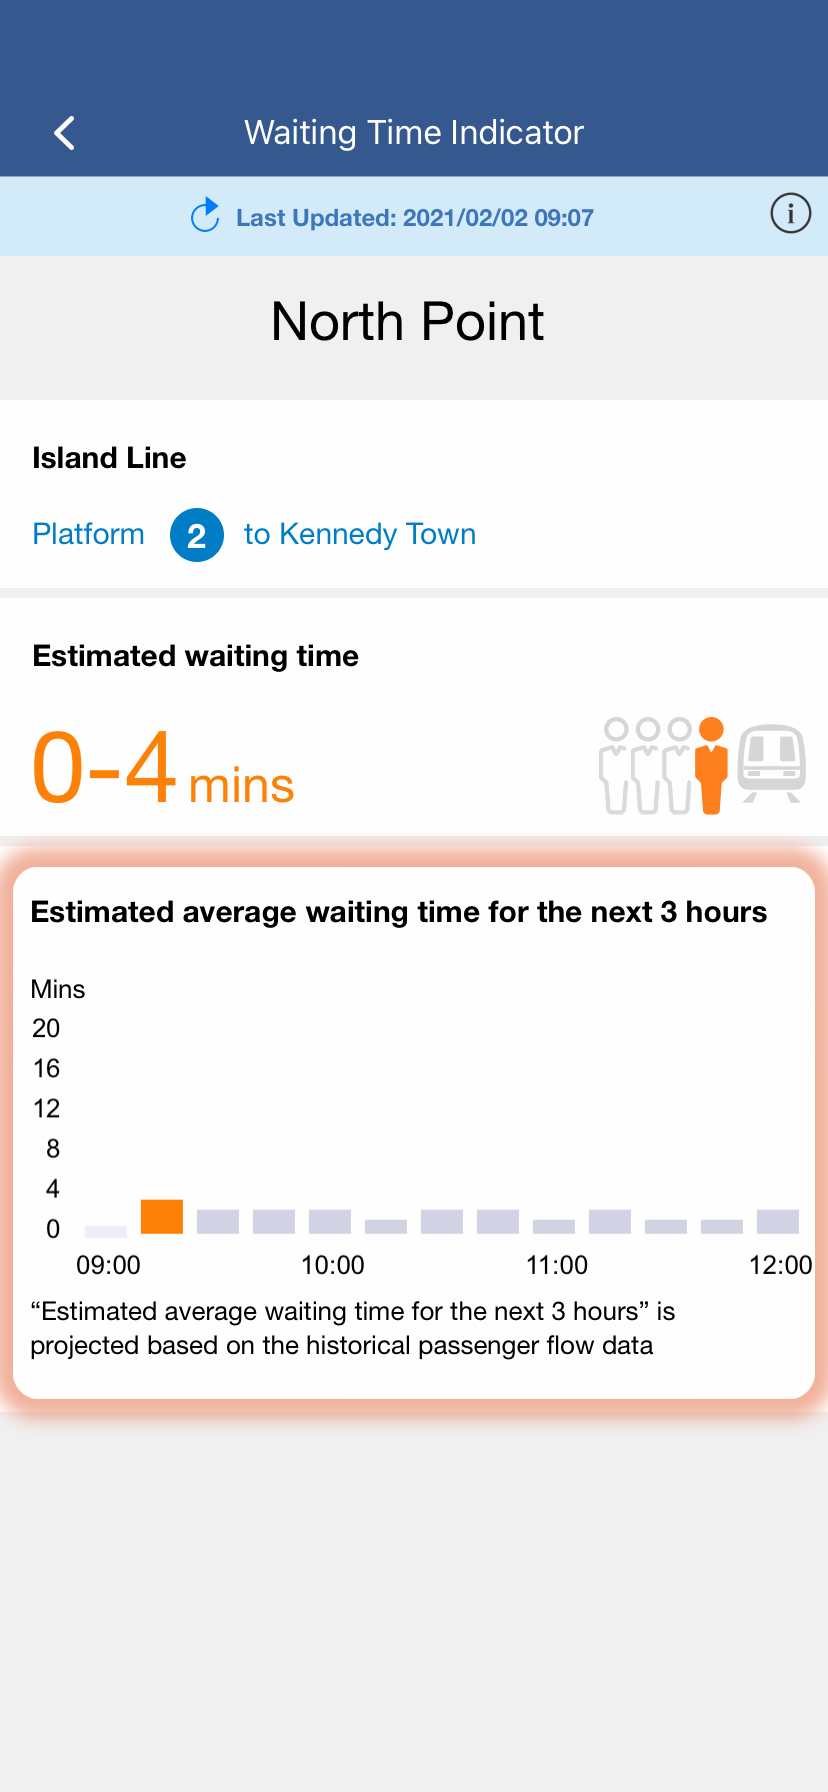 The estimated average waiting time for the next 3 hours is projected based on historical passenger flow data for your reference